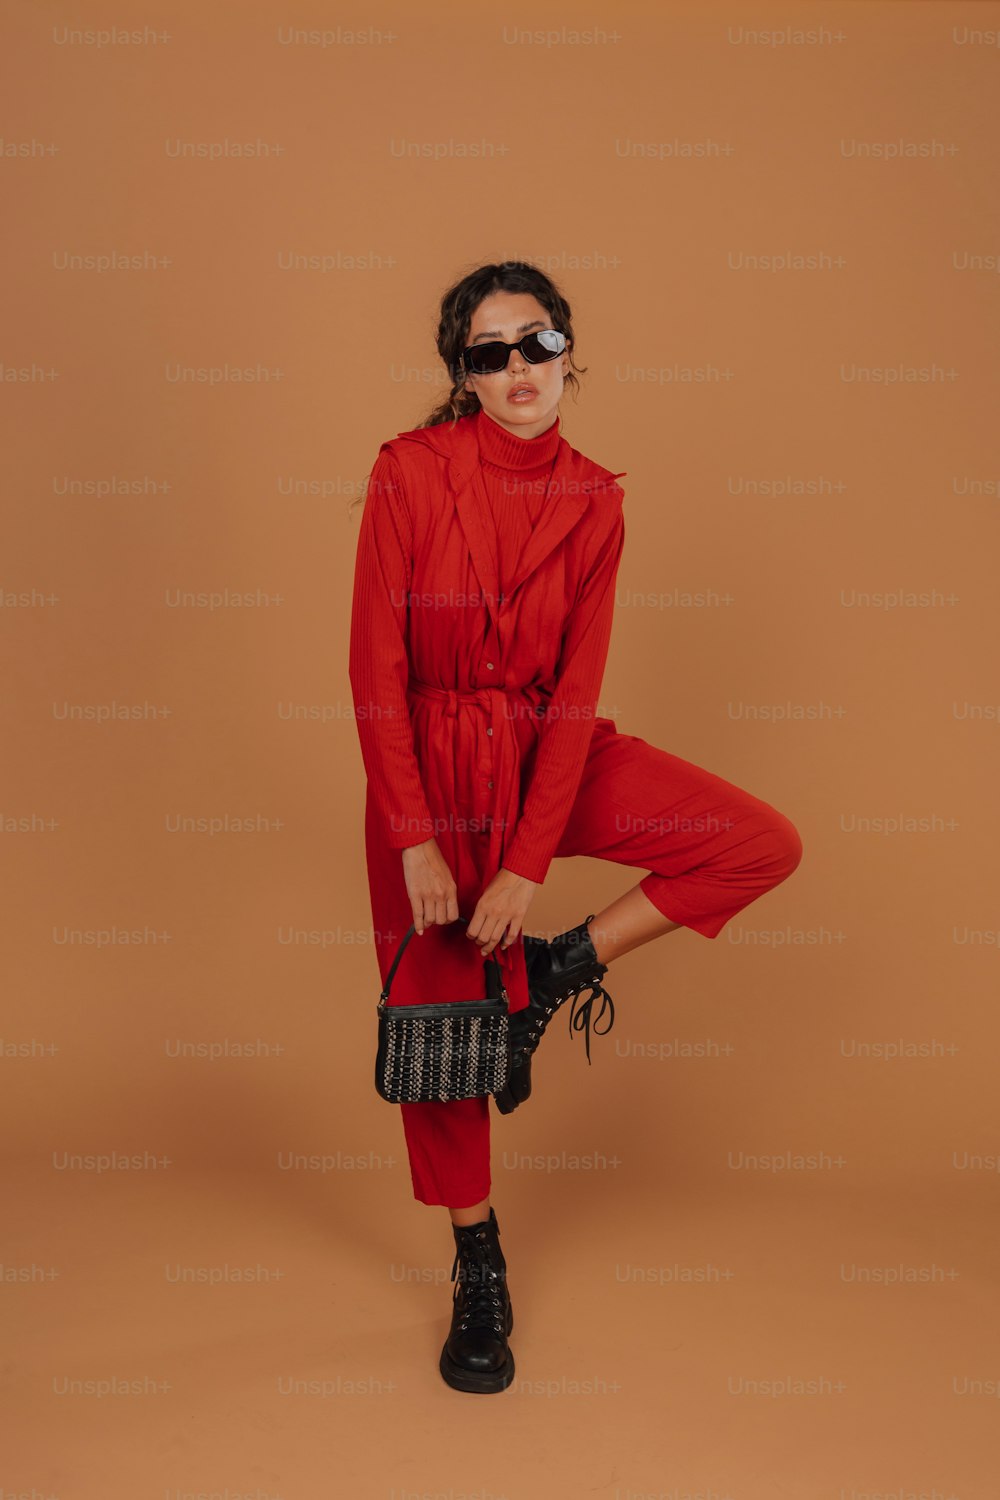 a woman wearing a red outfit and sunglasses